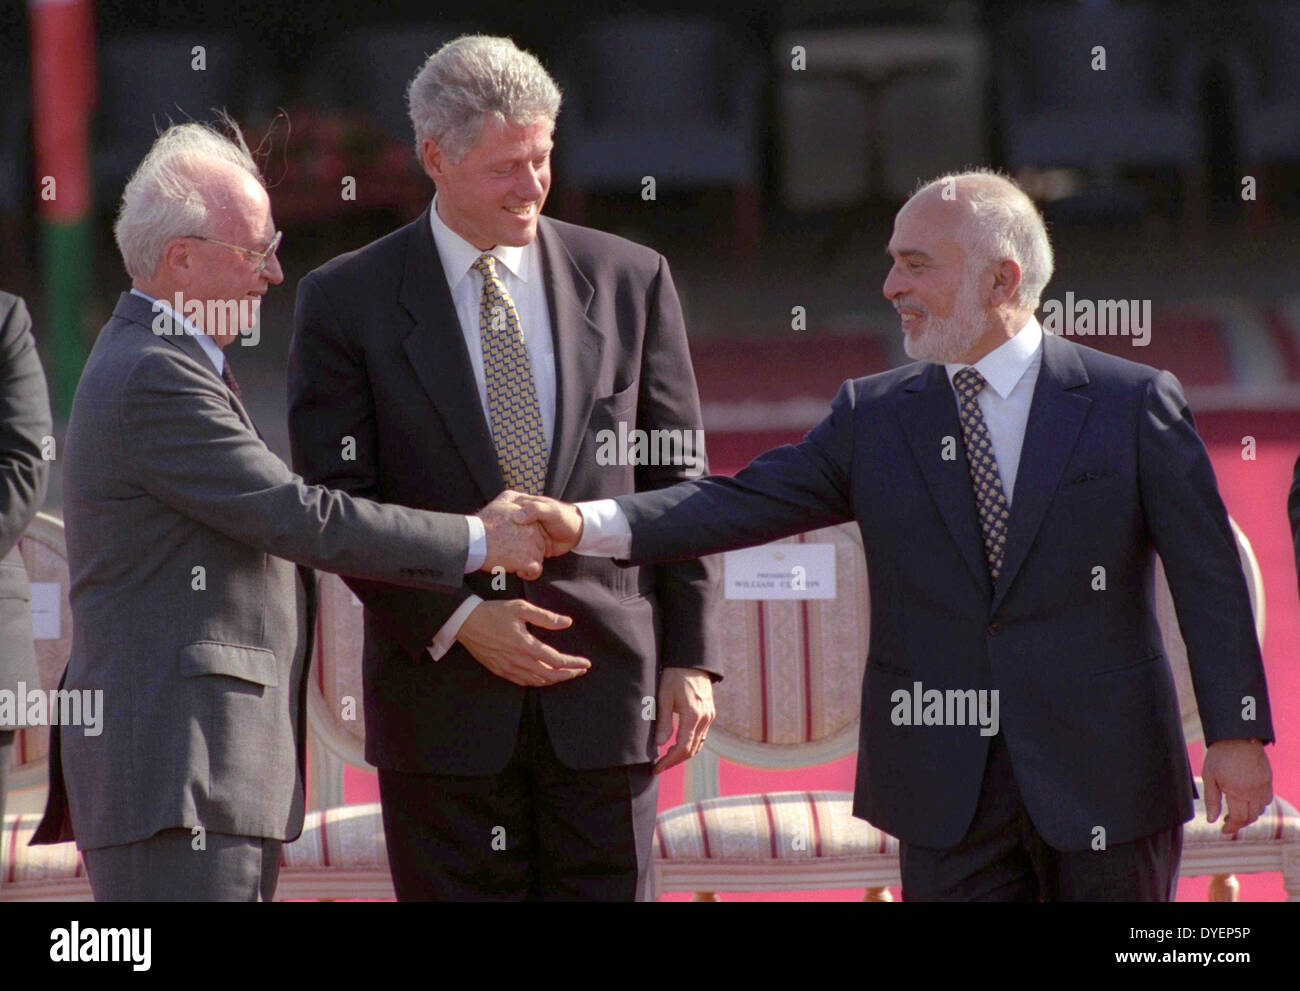 The Israel–Jordan peace treaty being signed in 1994. US President Bill Clinton watches Jordan's King Hussein and Israeli Prime Minister Yitzhak Rabin sign the treaty on the White house lawn Stock Photo